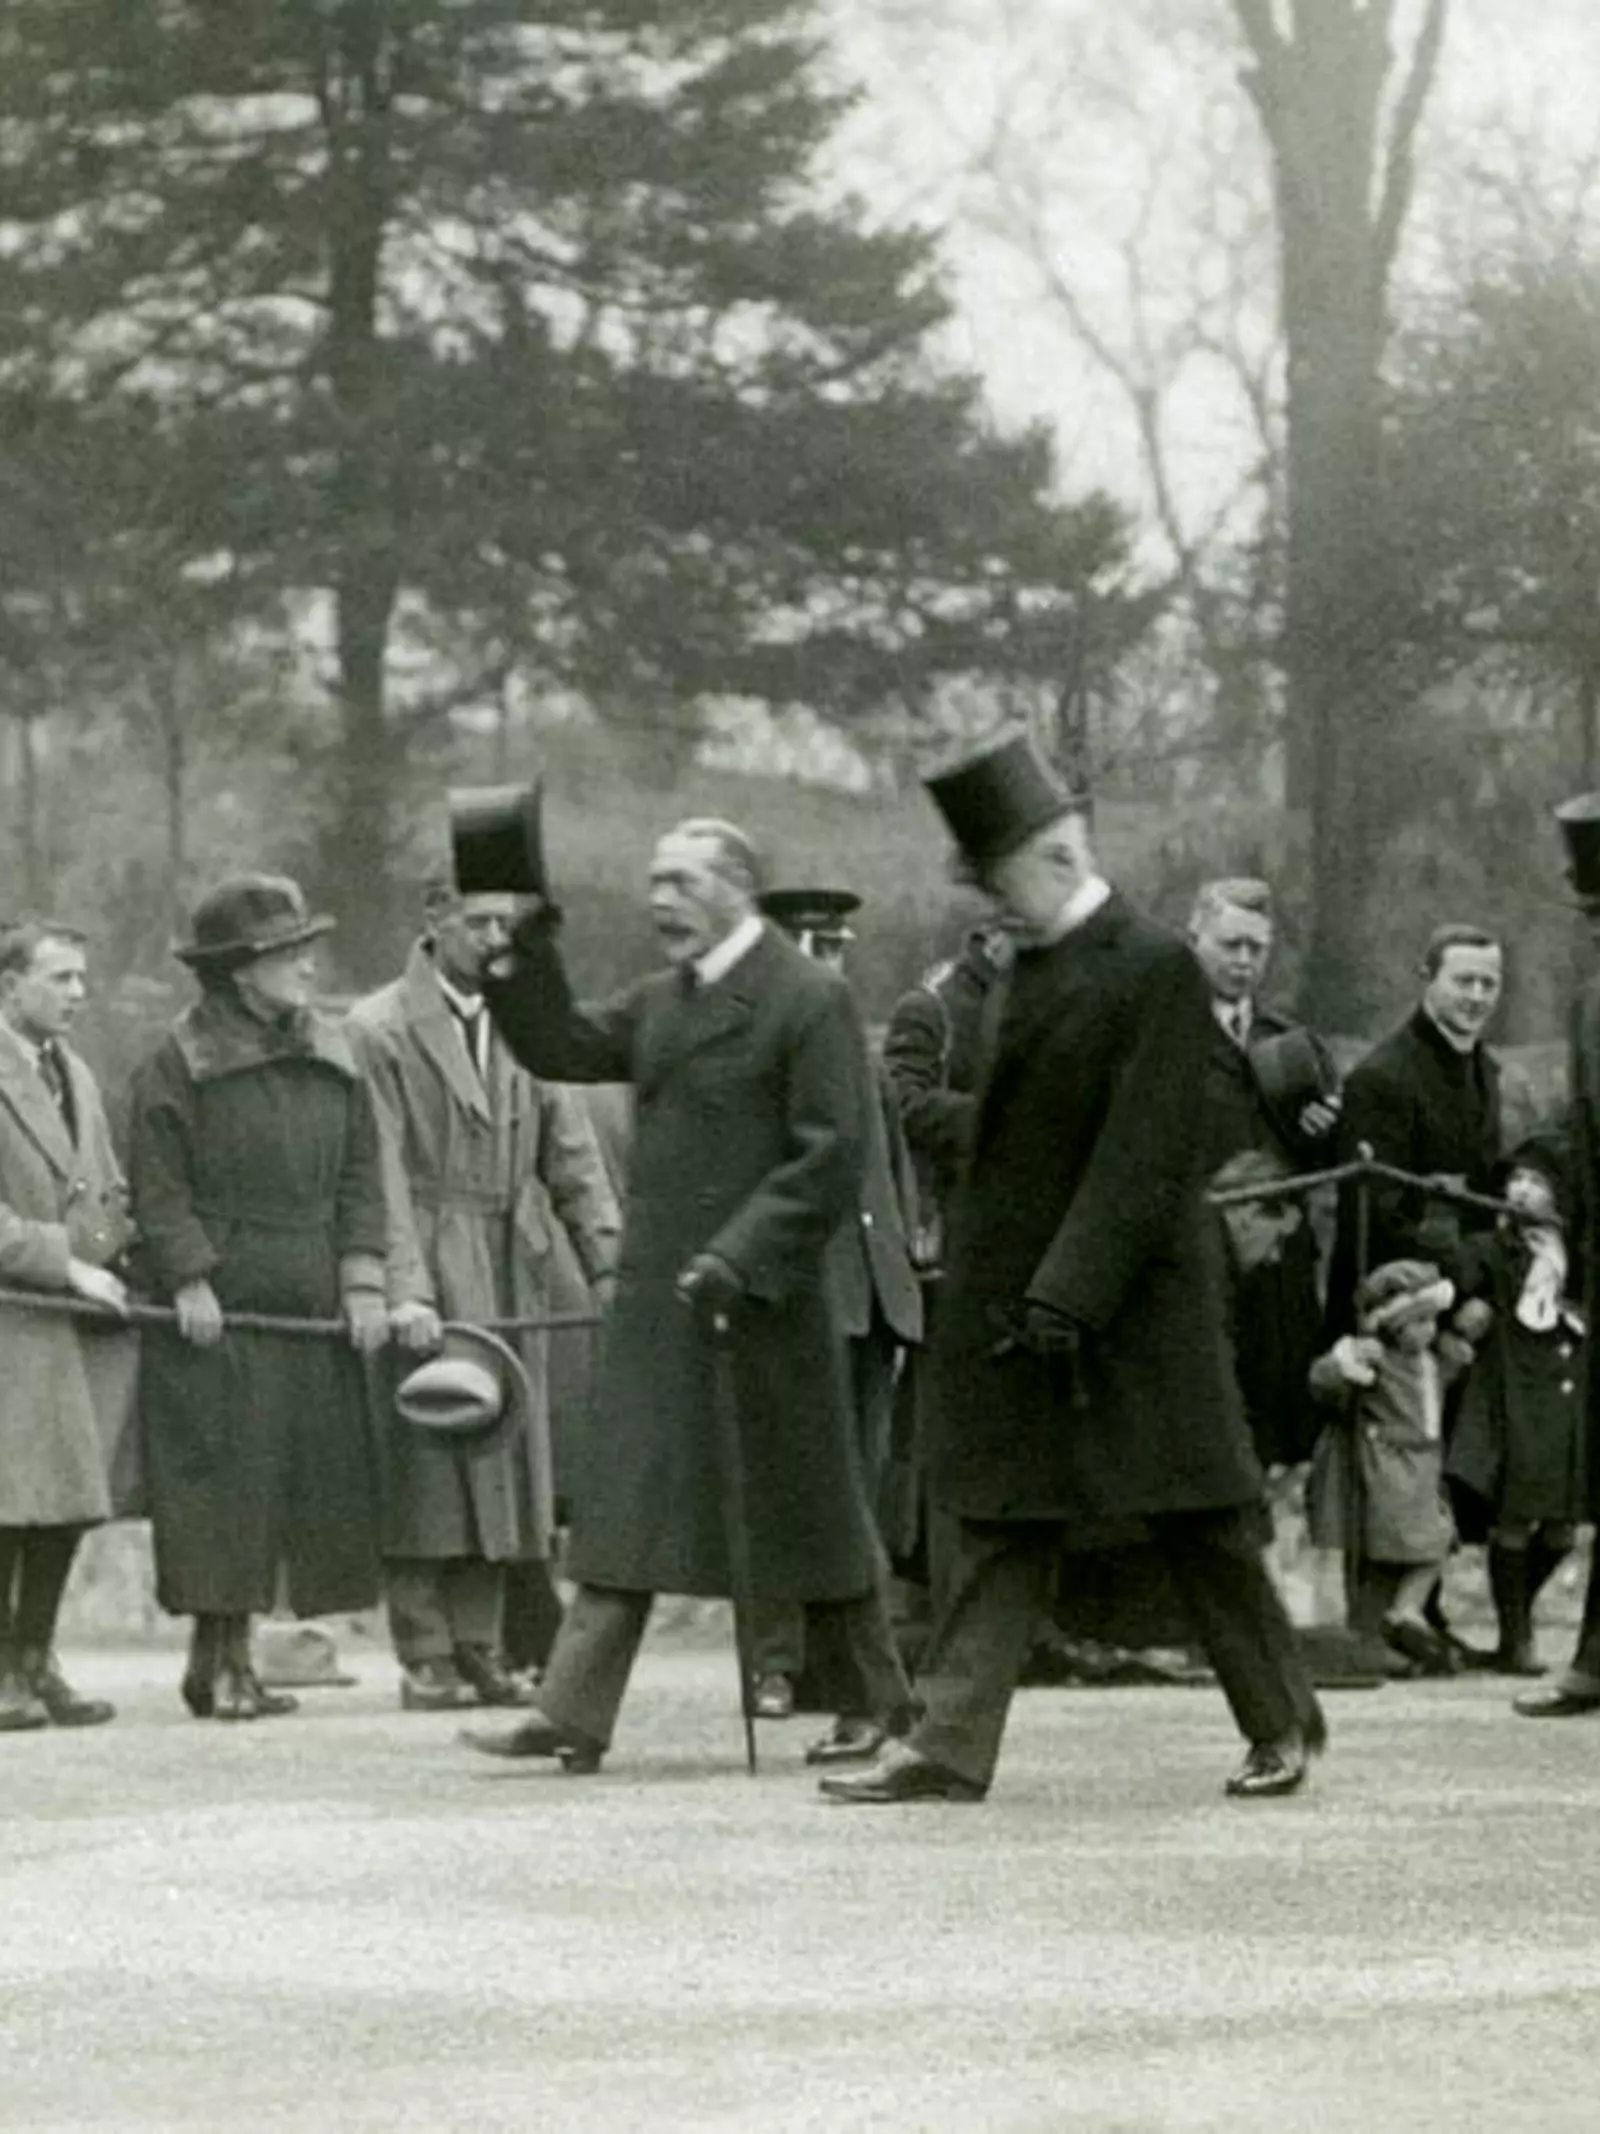 King George V, raising his hat to the crowds at the front of his entourage, during a visit to London Zoo to officially open the Aquarium. Queen Mary walks behind wearing a fur coat. The present Aquarium was built in 1921 and officially opened by King George V and Queen Mary in April 1924.